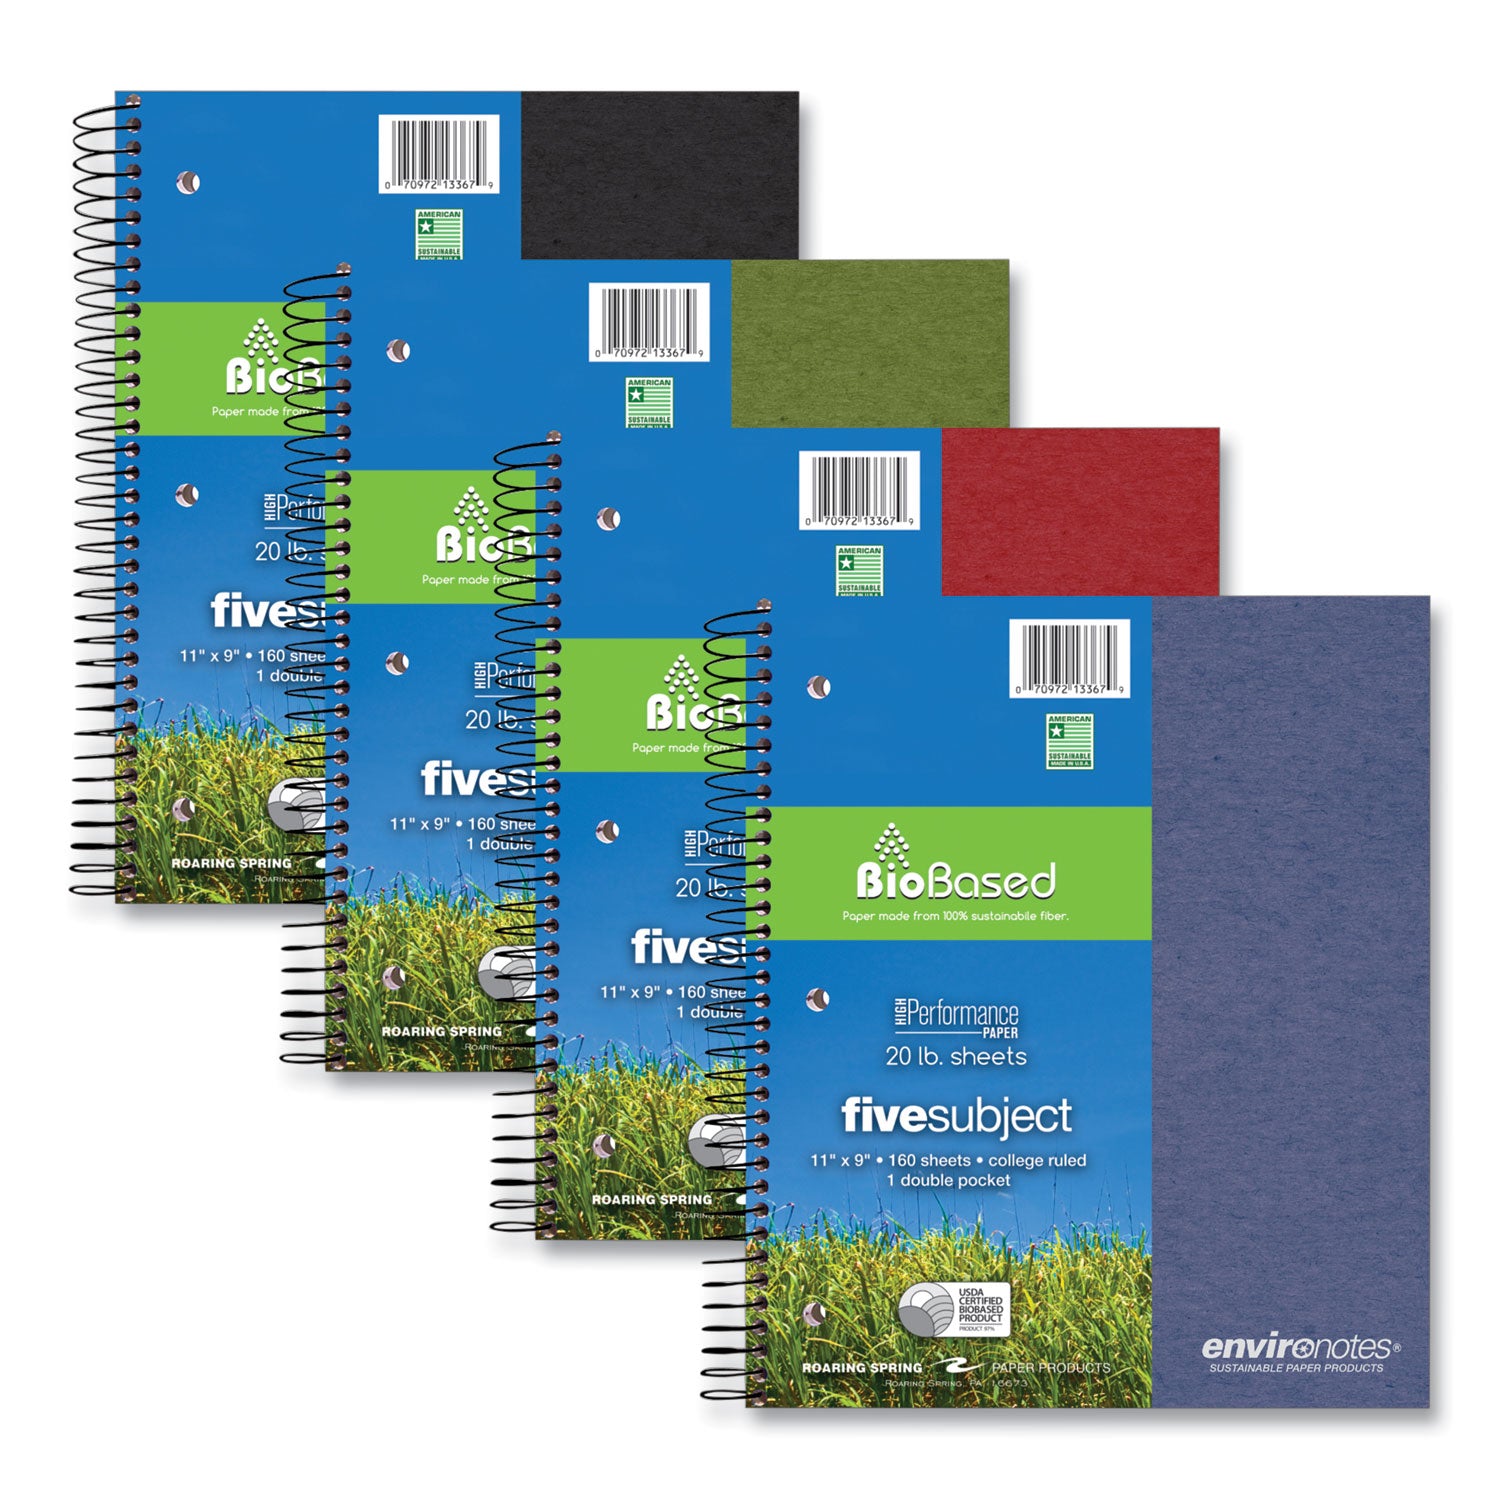 earthtones-biobased-5-subject-notebook-med-college-rule-random-asst-covers-160-11x9-sheets-12-ctships-in-4-6-bus-days_roa13367cs - 2